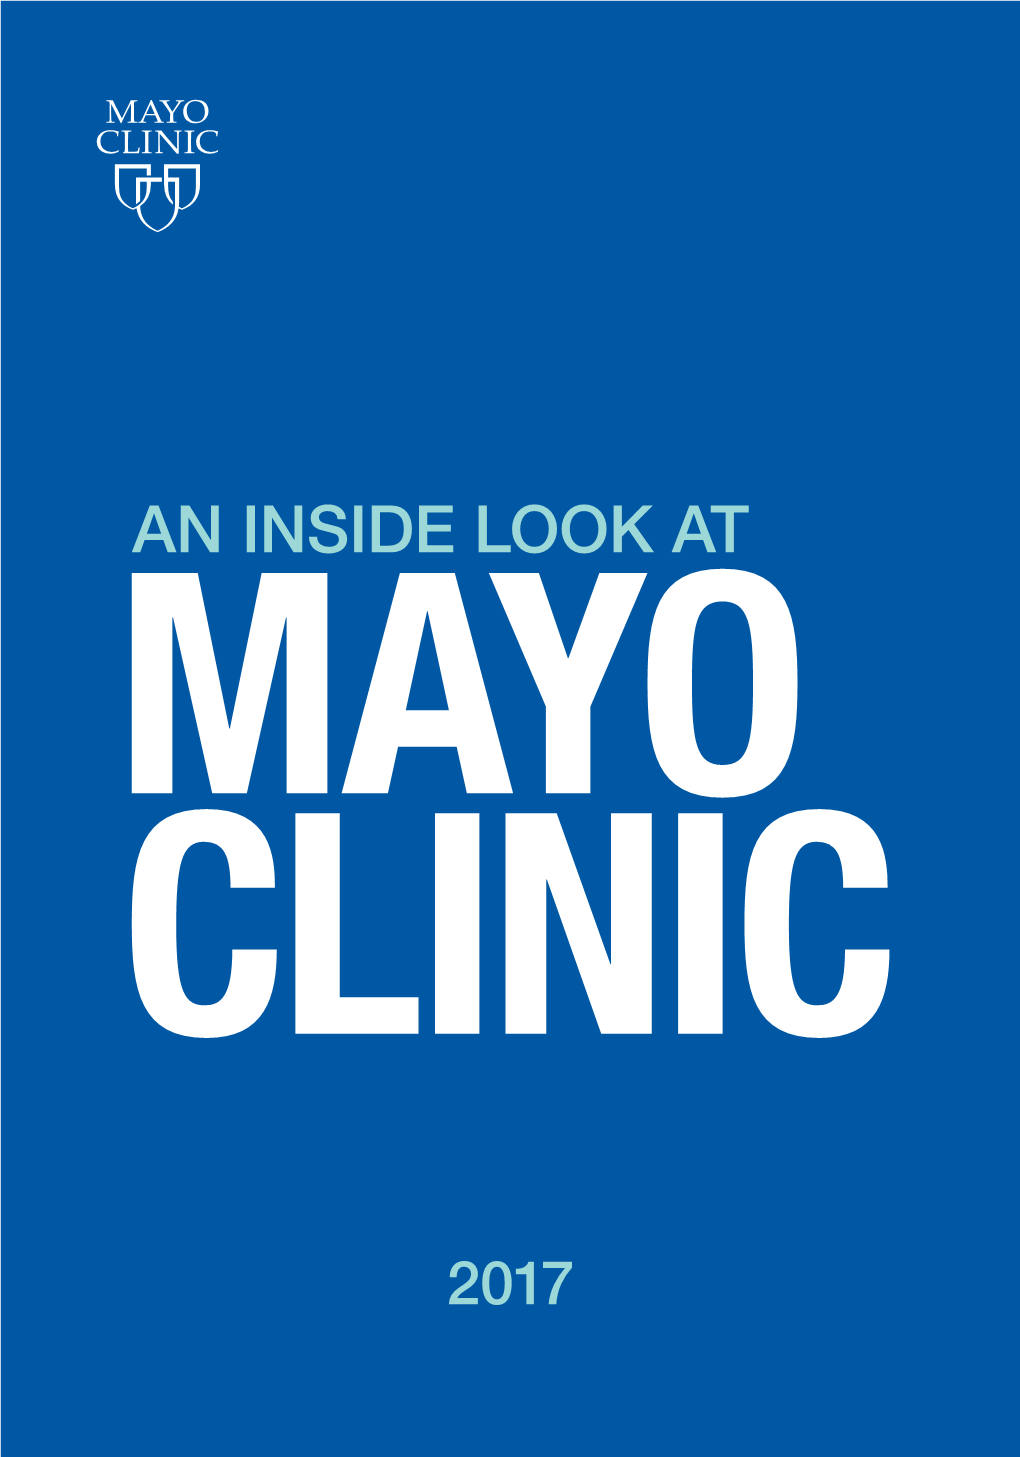 An Inside Look at Mayo Clinic